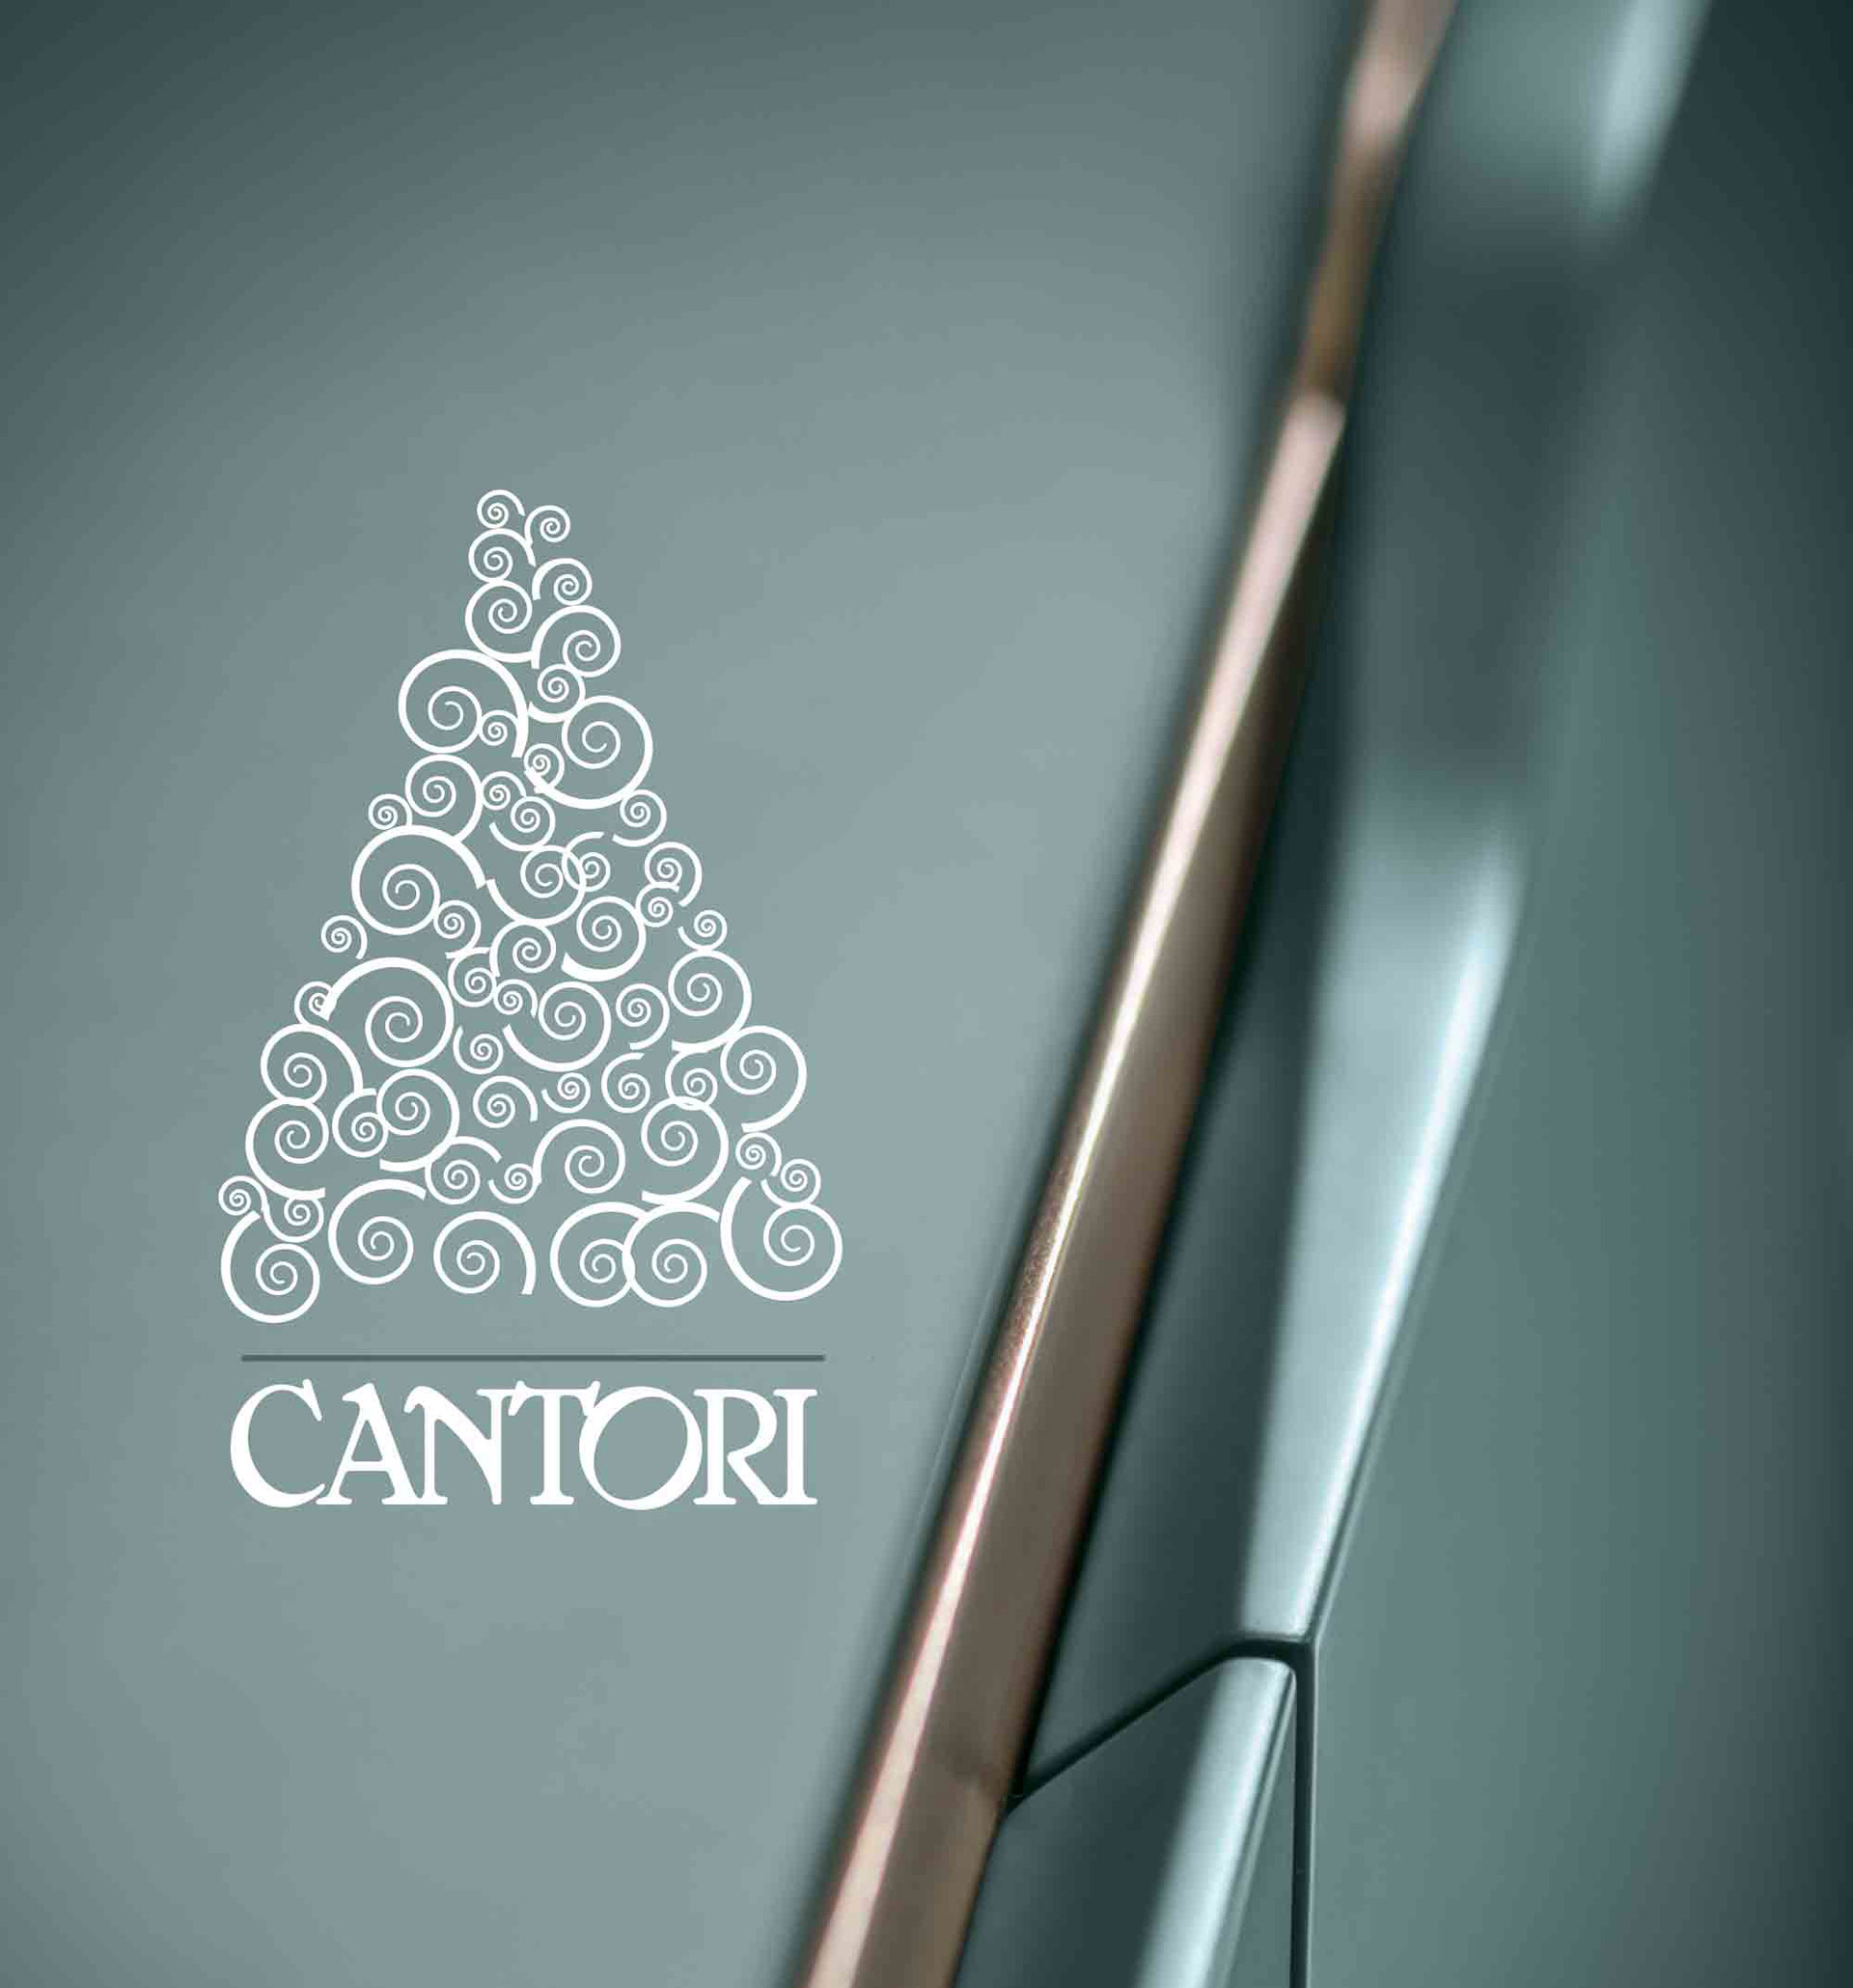 Wishing you a magical and blissful holiday - Cantori